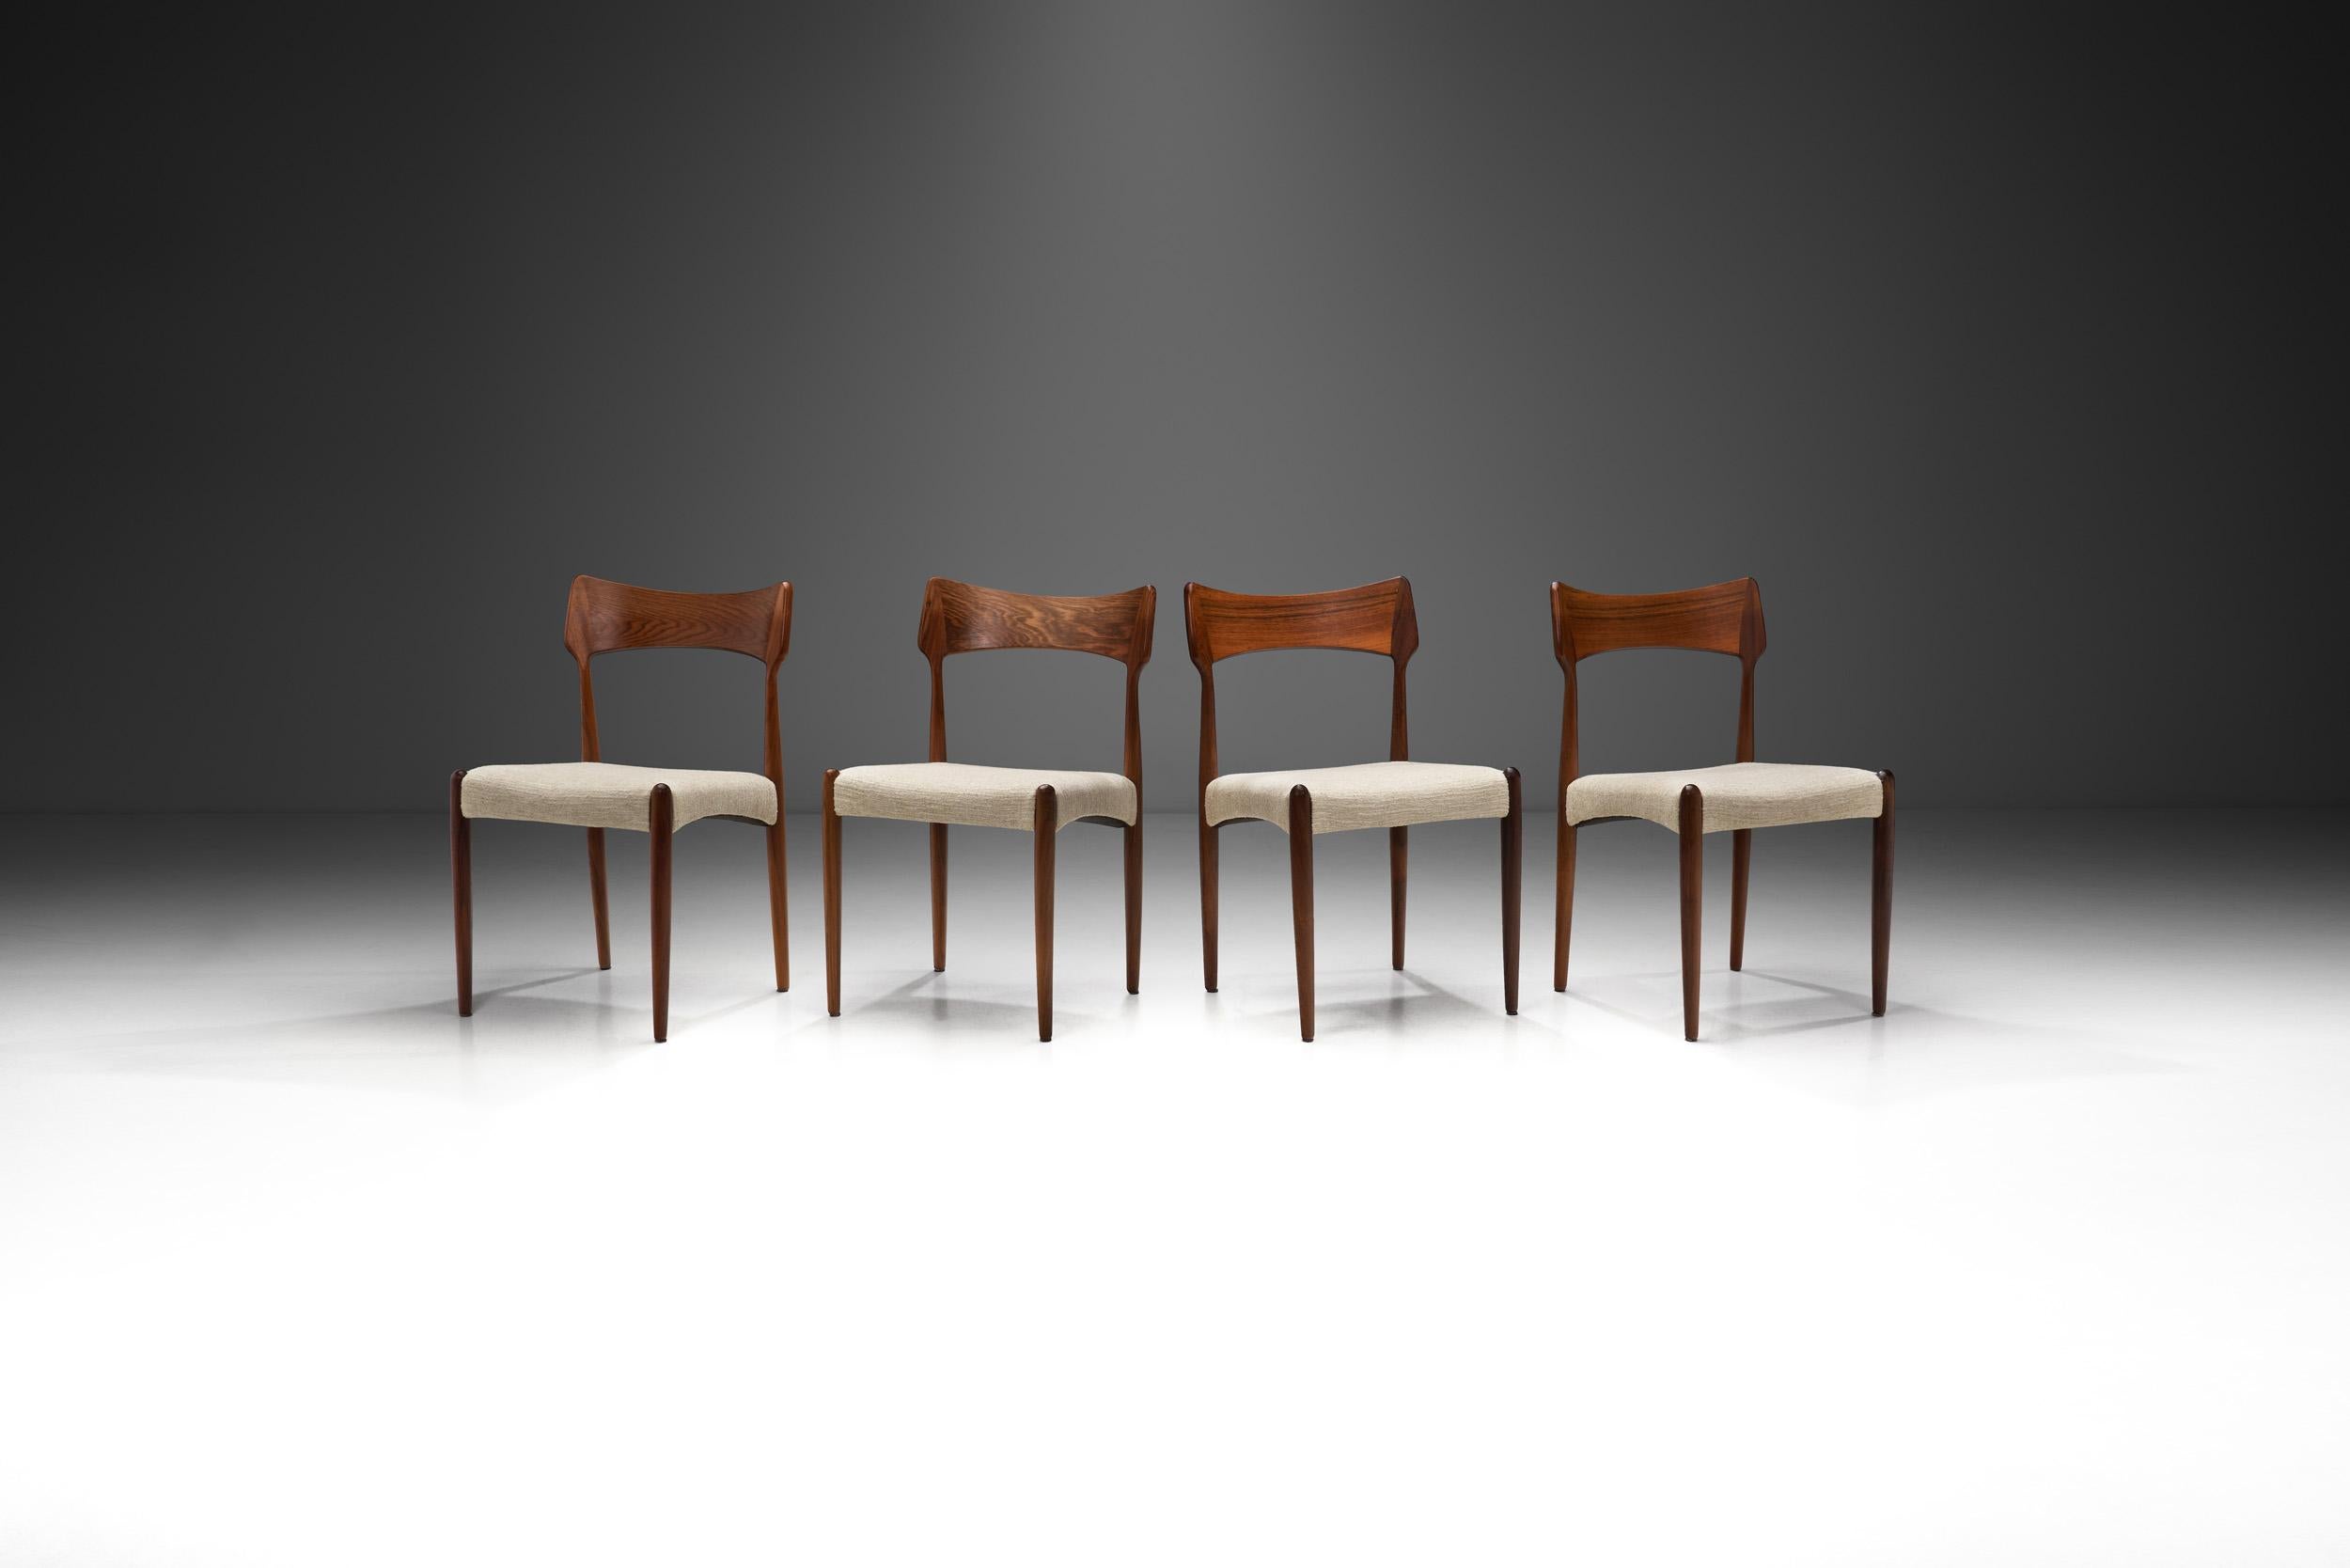 This gorgeous set of “model 142” chairs by the Danish furniture maker Bernhard Pedersen og Søn was inspired by classic Danish furniture design and simplicity. These exotic wood chairs feature typical Danish design elements with gracefully sculpted